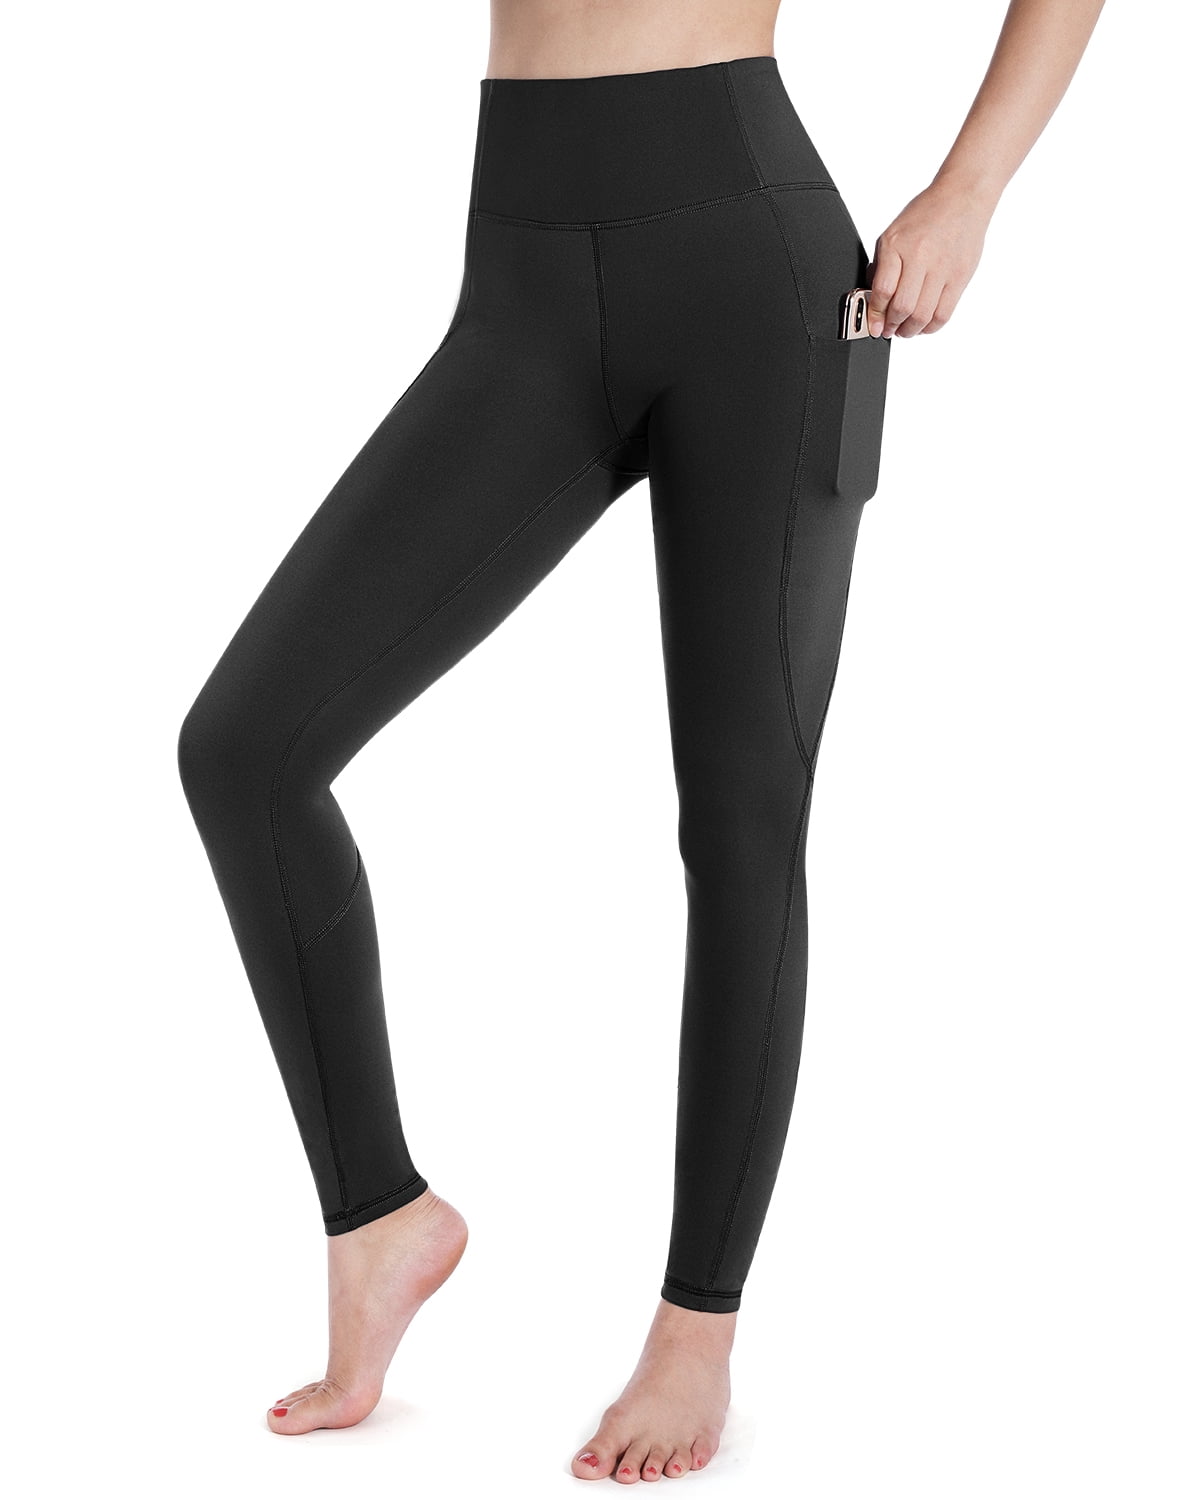  Diravo High Waisted Womens Leggings, Black Tights Buttery Soft  Tummy Control Pants Lined Legging for Yoga Workout Athletic : Clothing,  Shoes & Jewelry